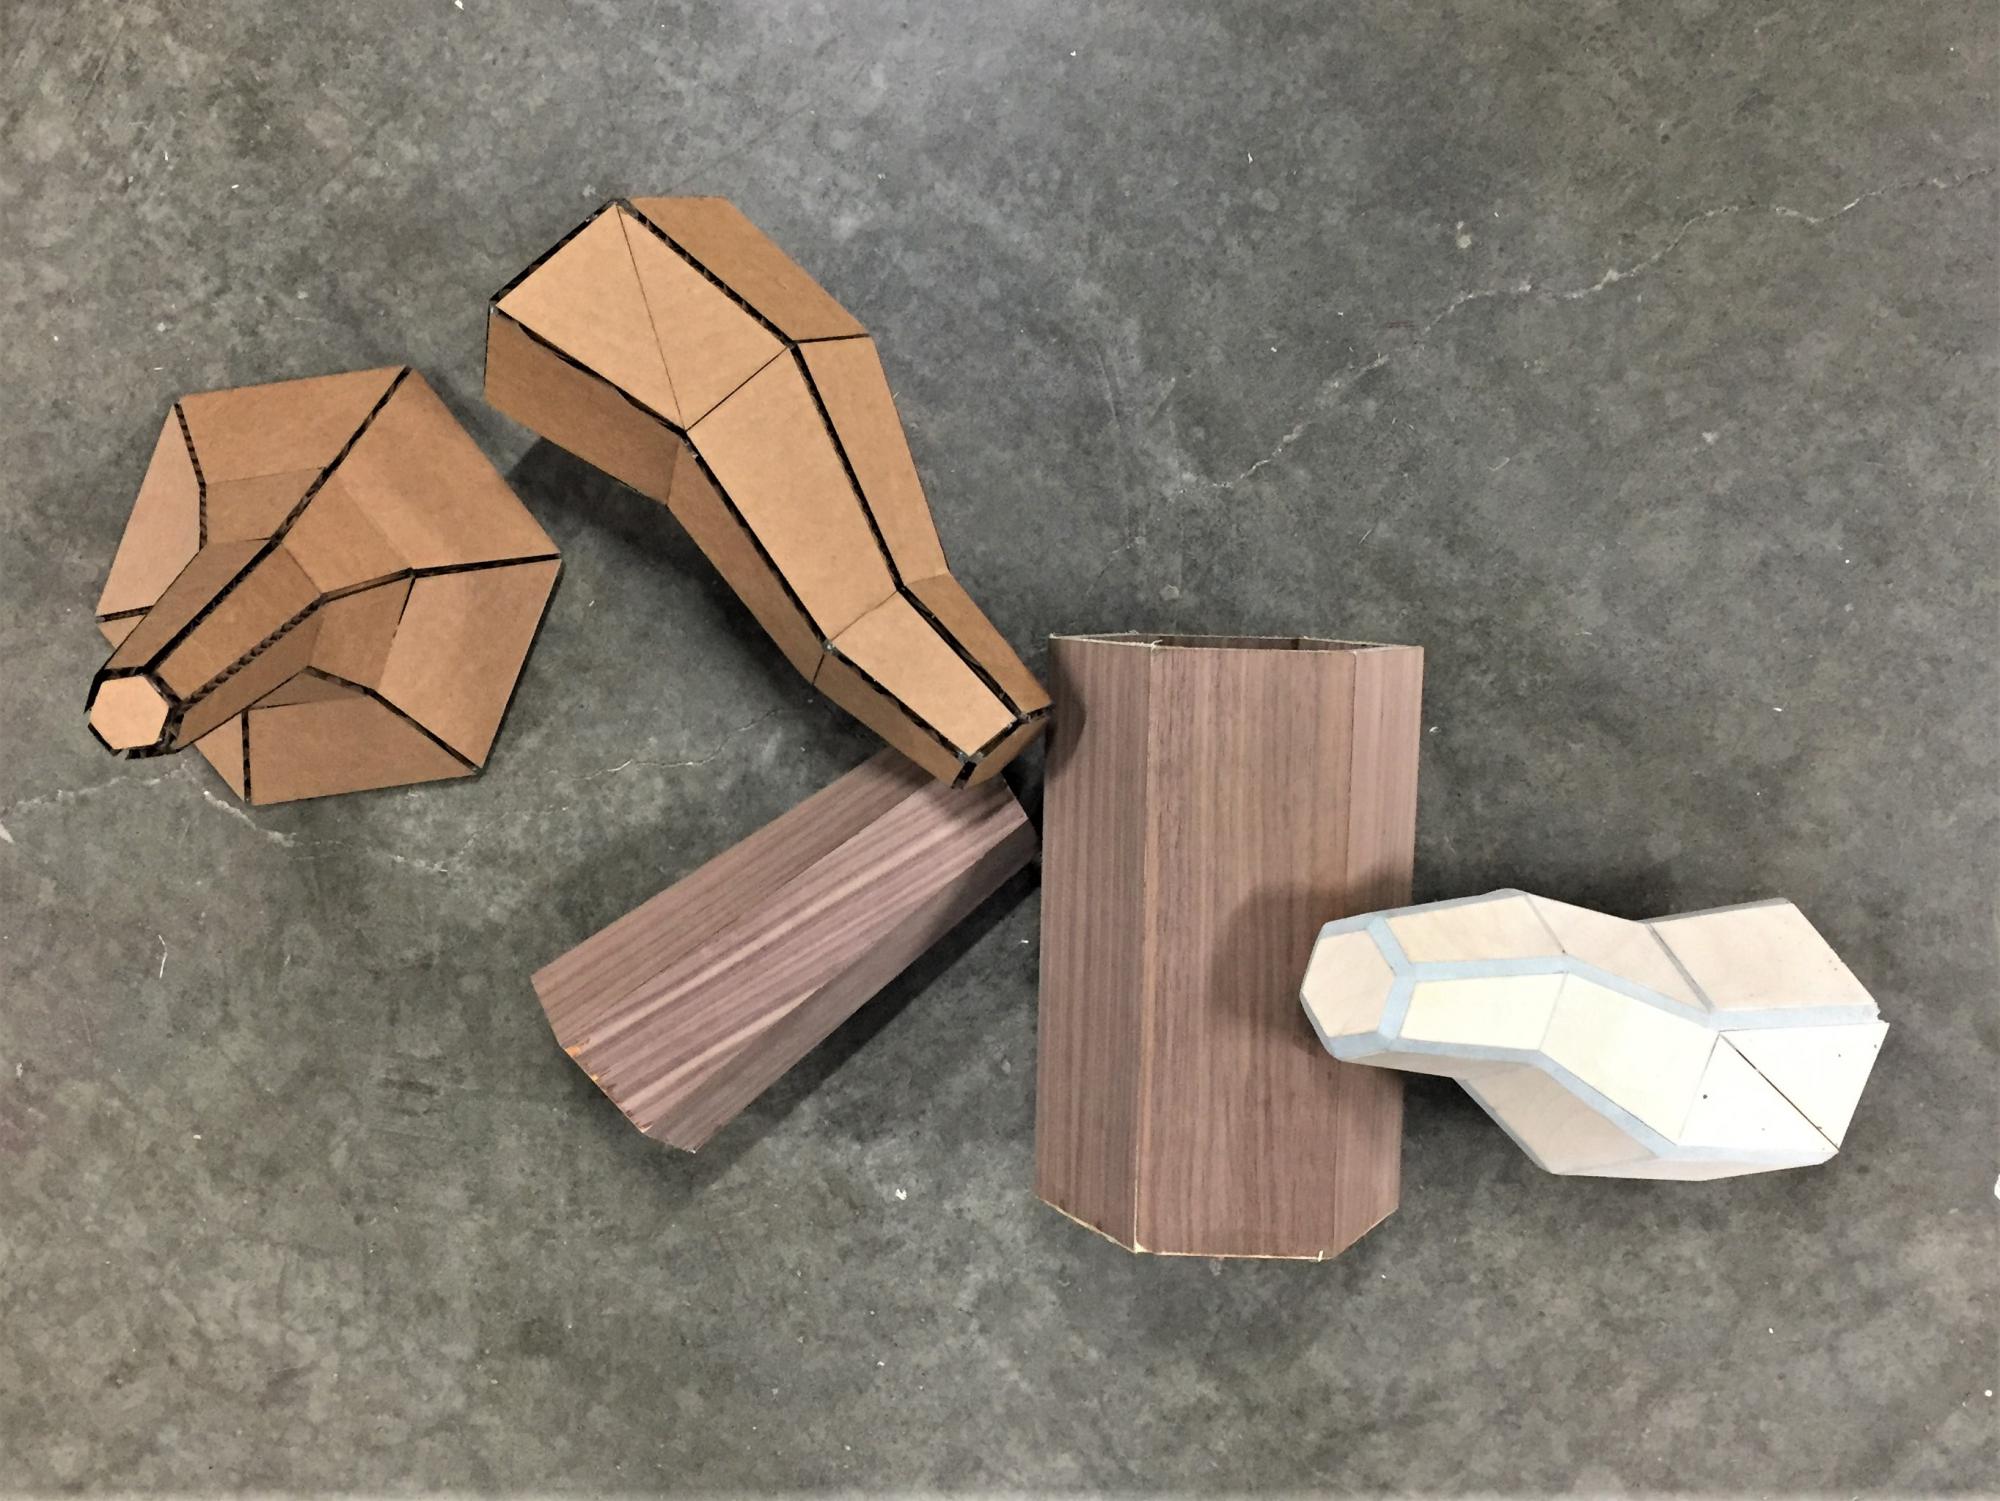 Ryan's prototypes for a smooth exterior that still implies a natural wood texture!